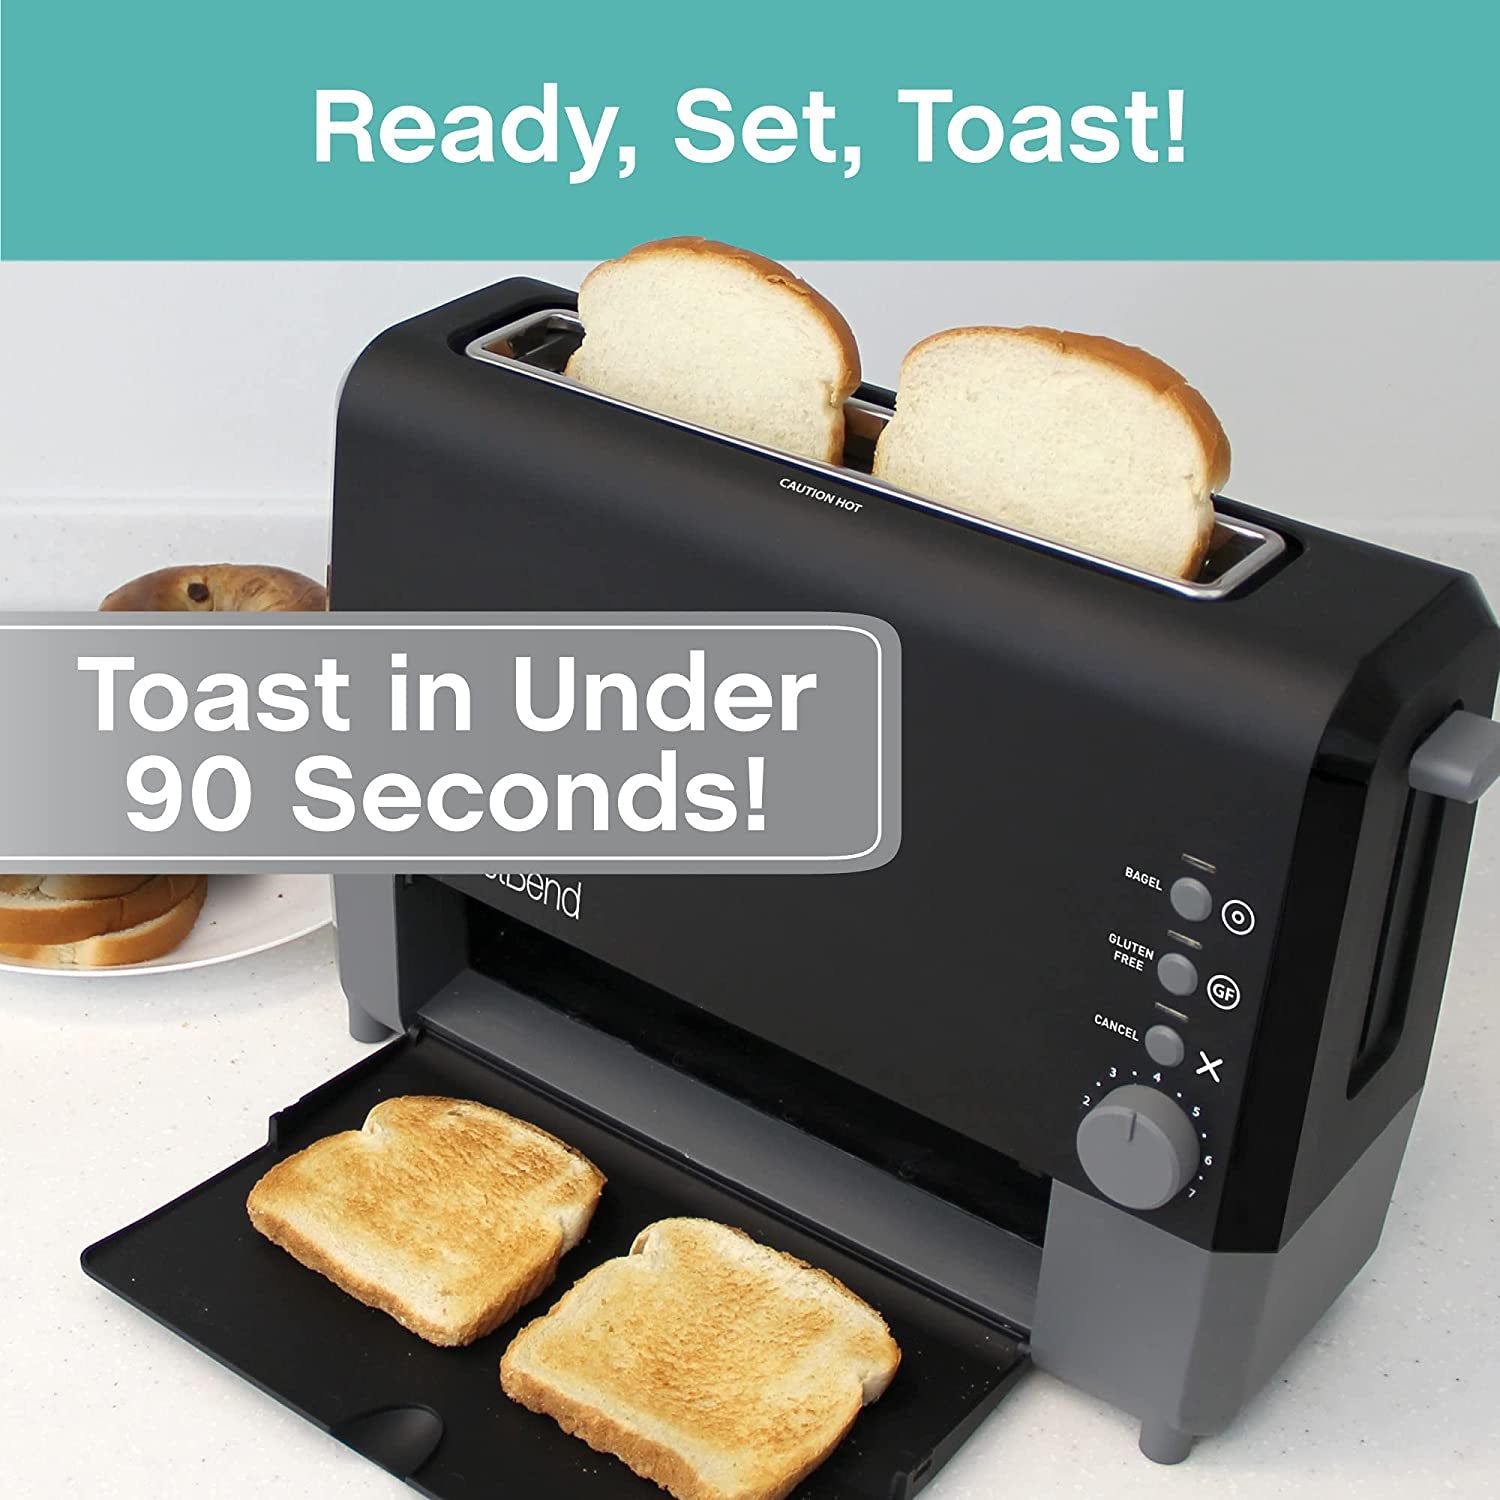 Quikserve 2-Slice Toaster with Wide Slot, Bagel and Gluten-Free Settings, Cool Touch Exterior, Removable Serving Tray - Black